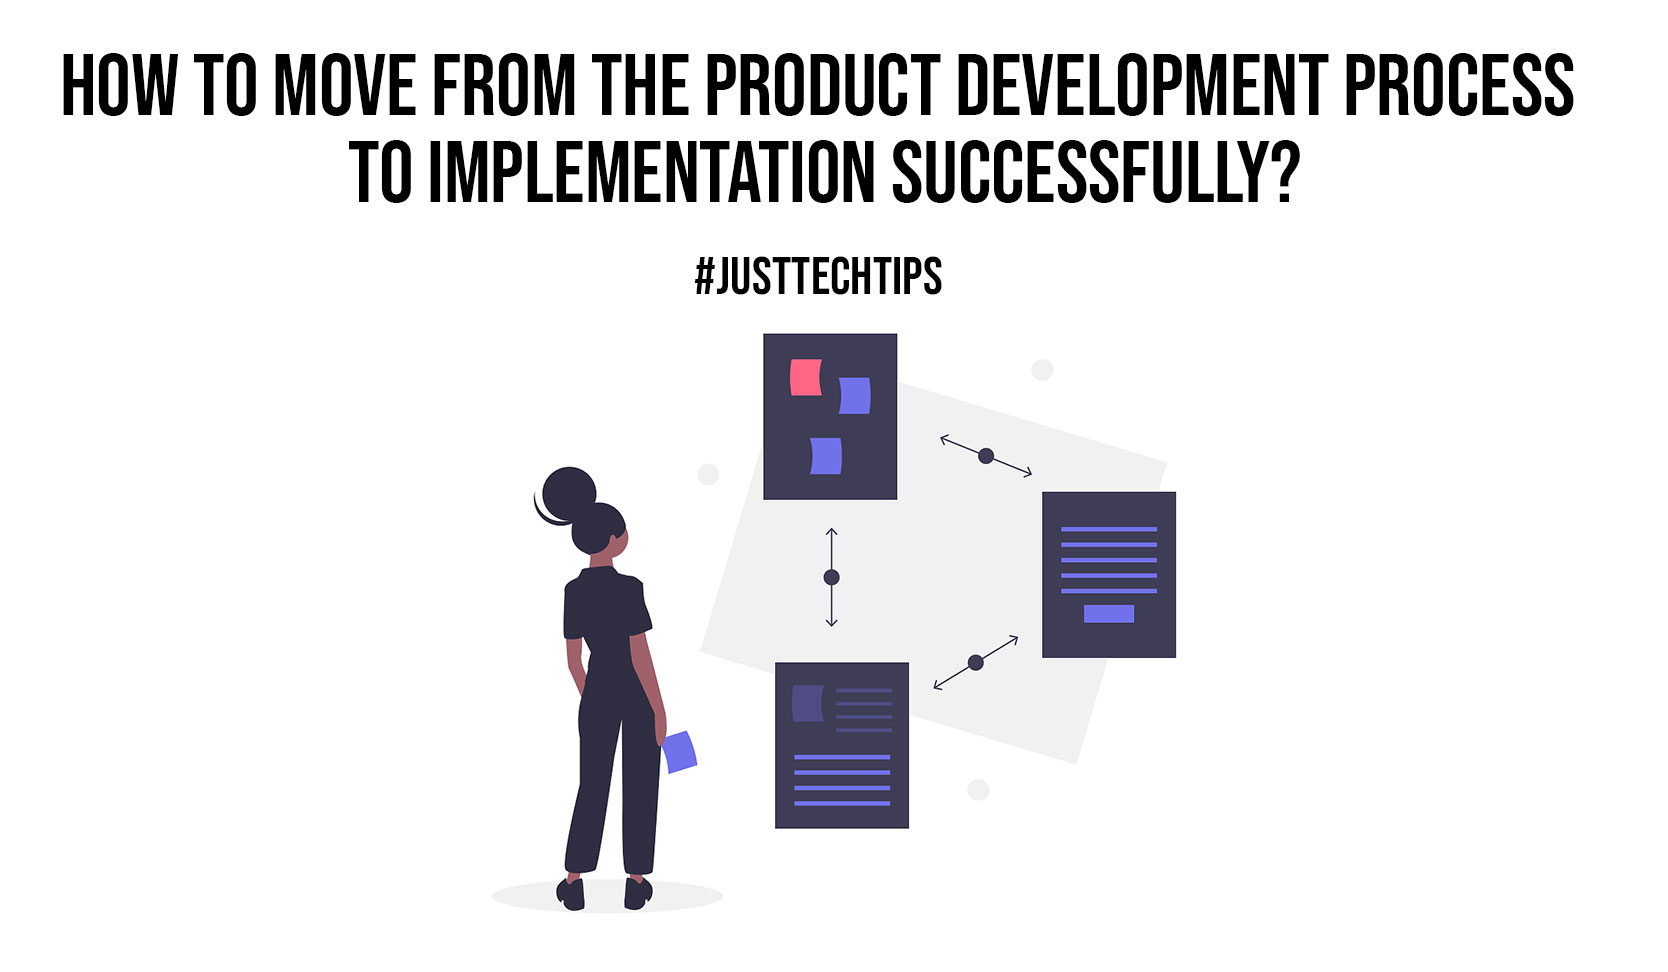 How To Move From The Product Development Process to Implementation Successfully